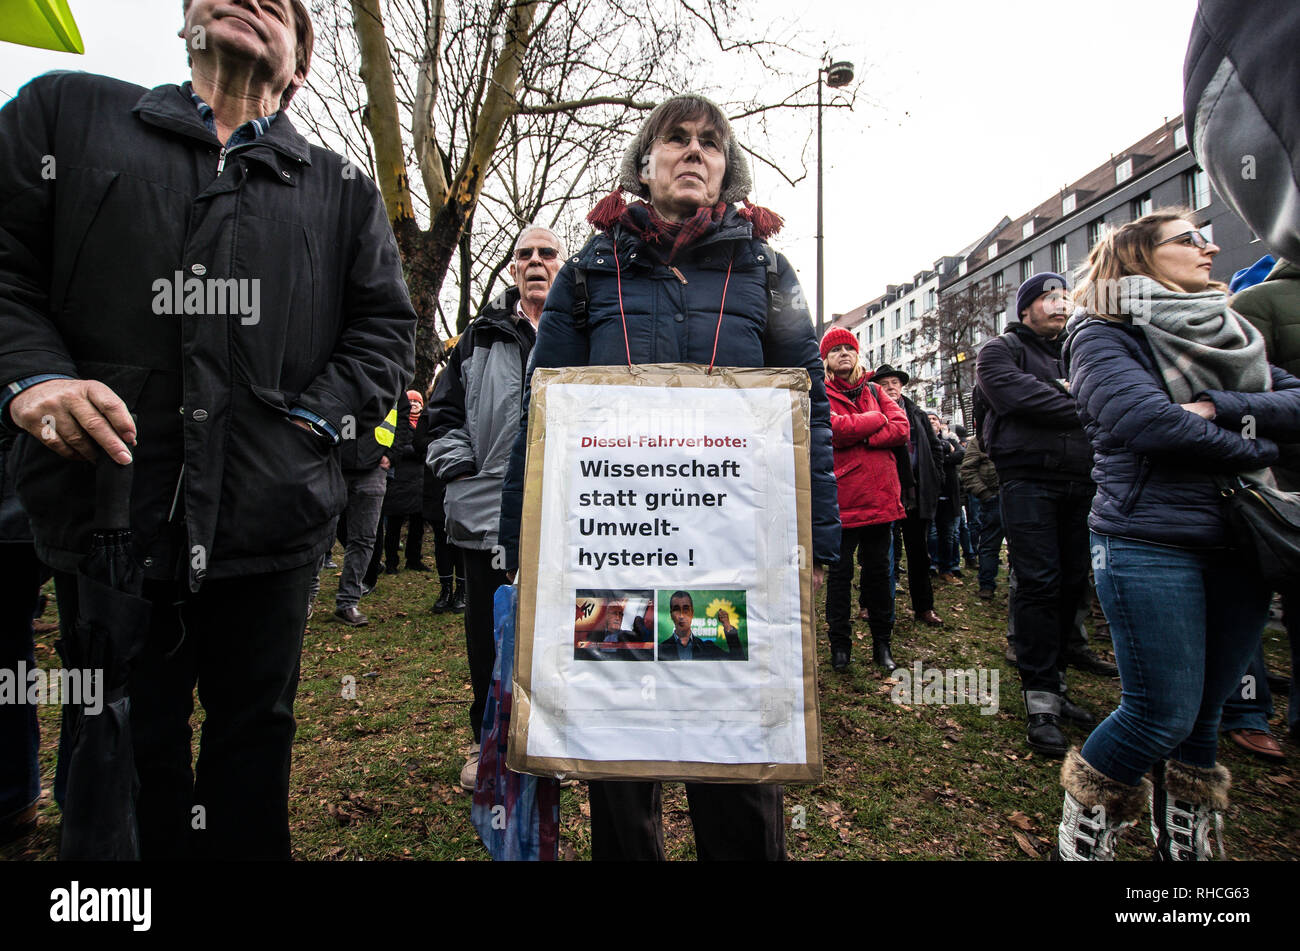 Munich, Bavaria, Germany. 2nd Feb, 2019. Responding to the prospect of diesel auto bans in major cities in Germany, protestors assembled at an air quality monitoring station in Munich's city center. Credit: ZUMA Press, Inc./Alamy Live News Stock Photo